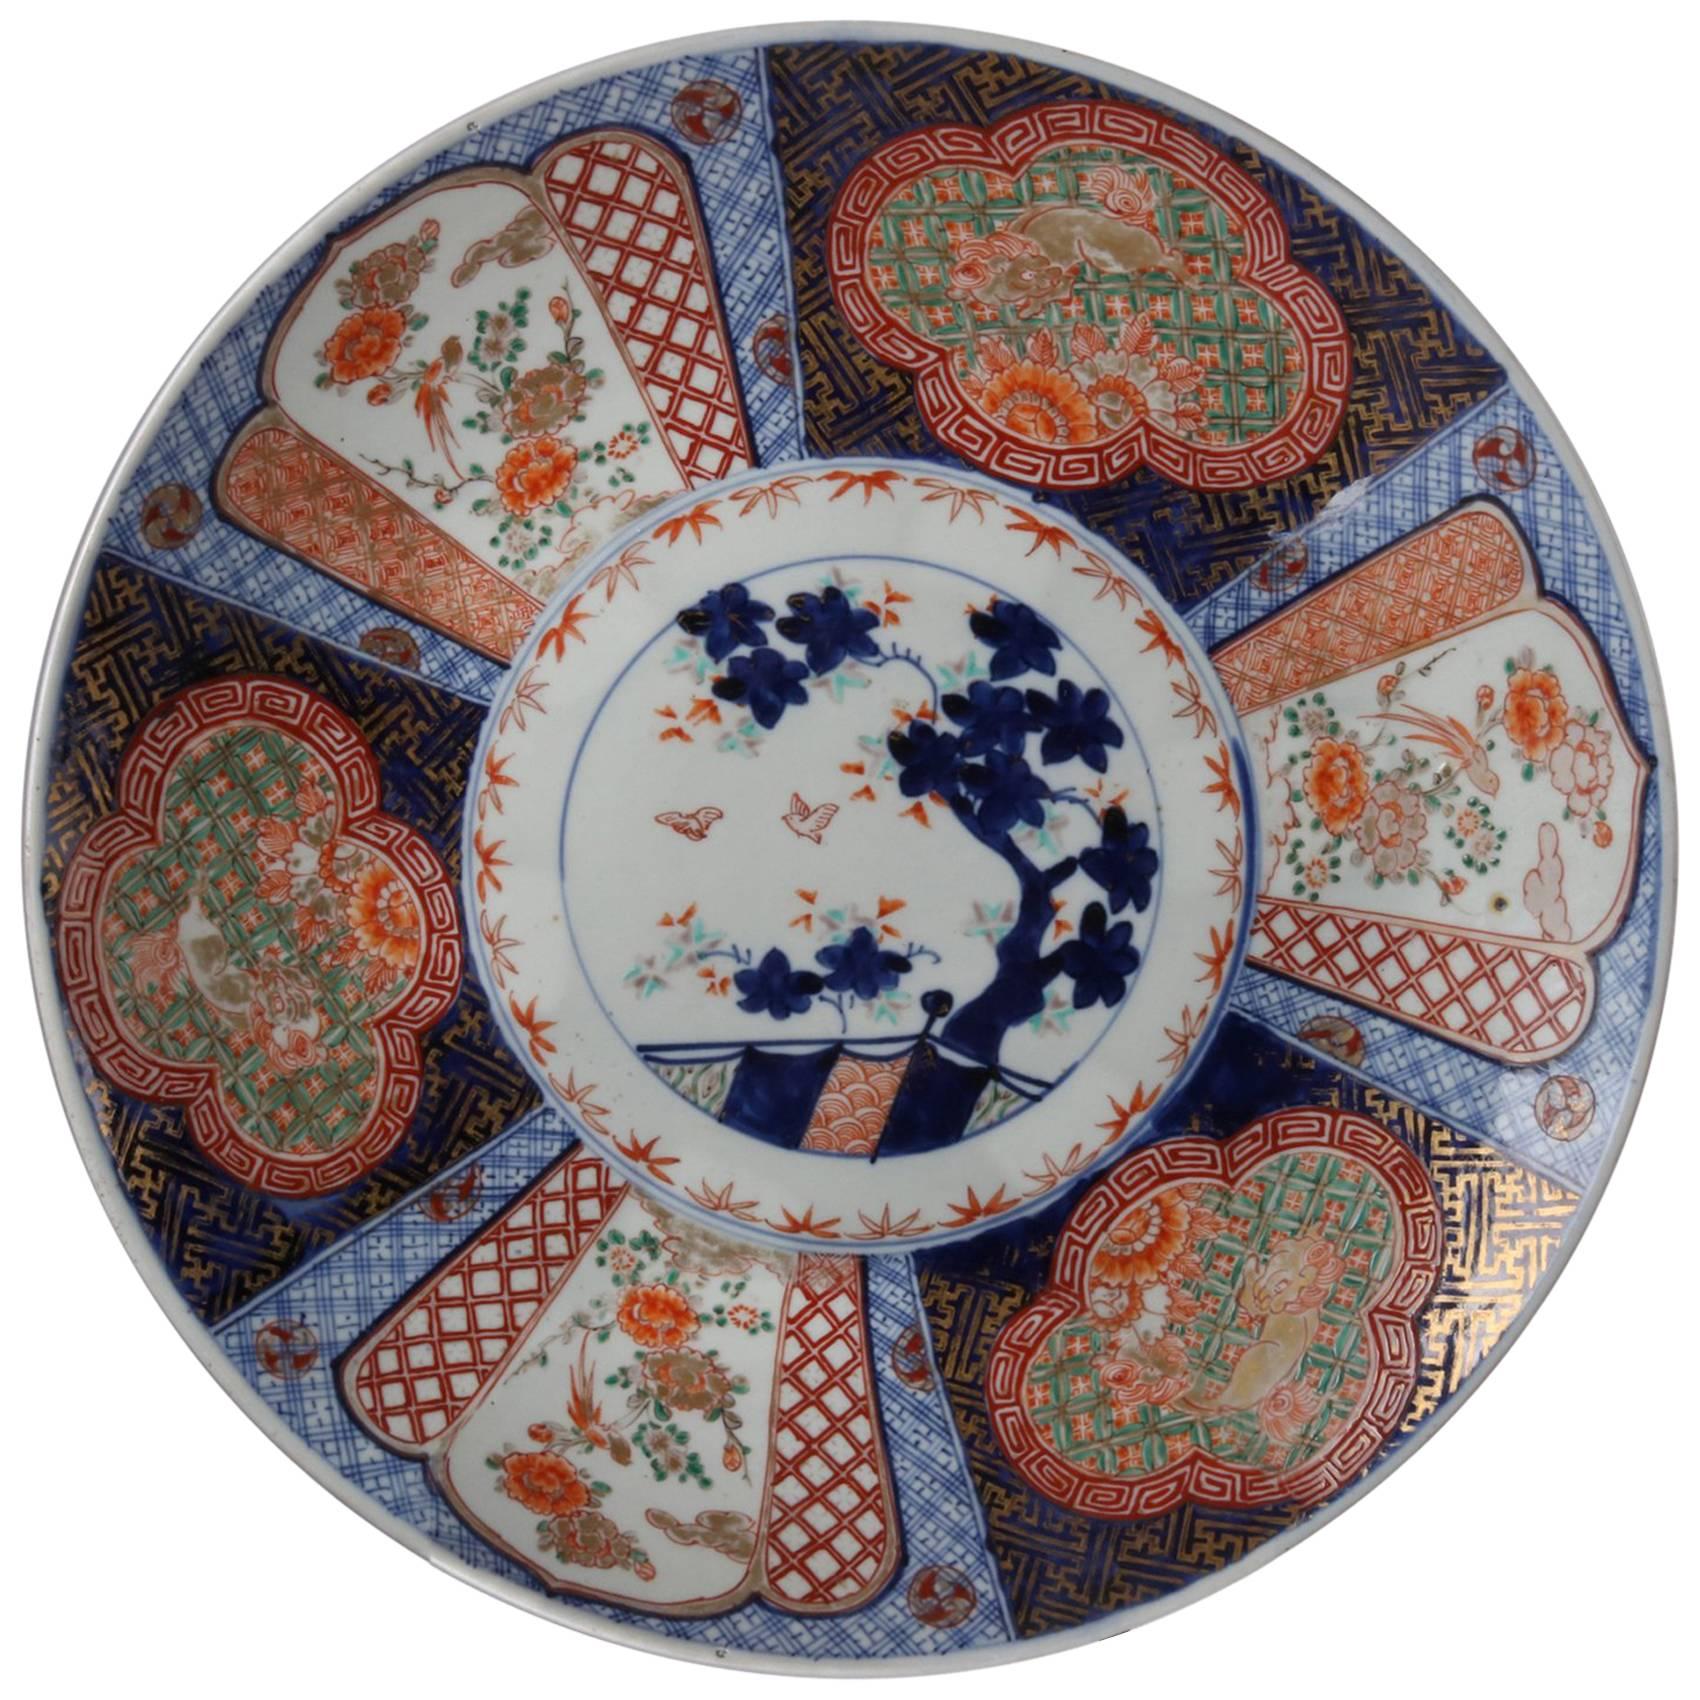 Antique Hand-Painted Porcelain Imari Charger, Animals and Bonsai, 20th Century